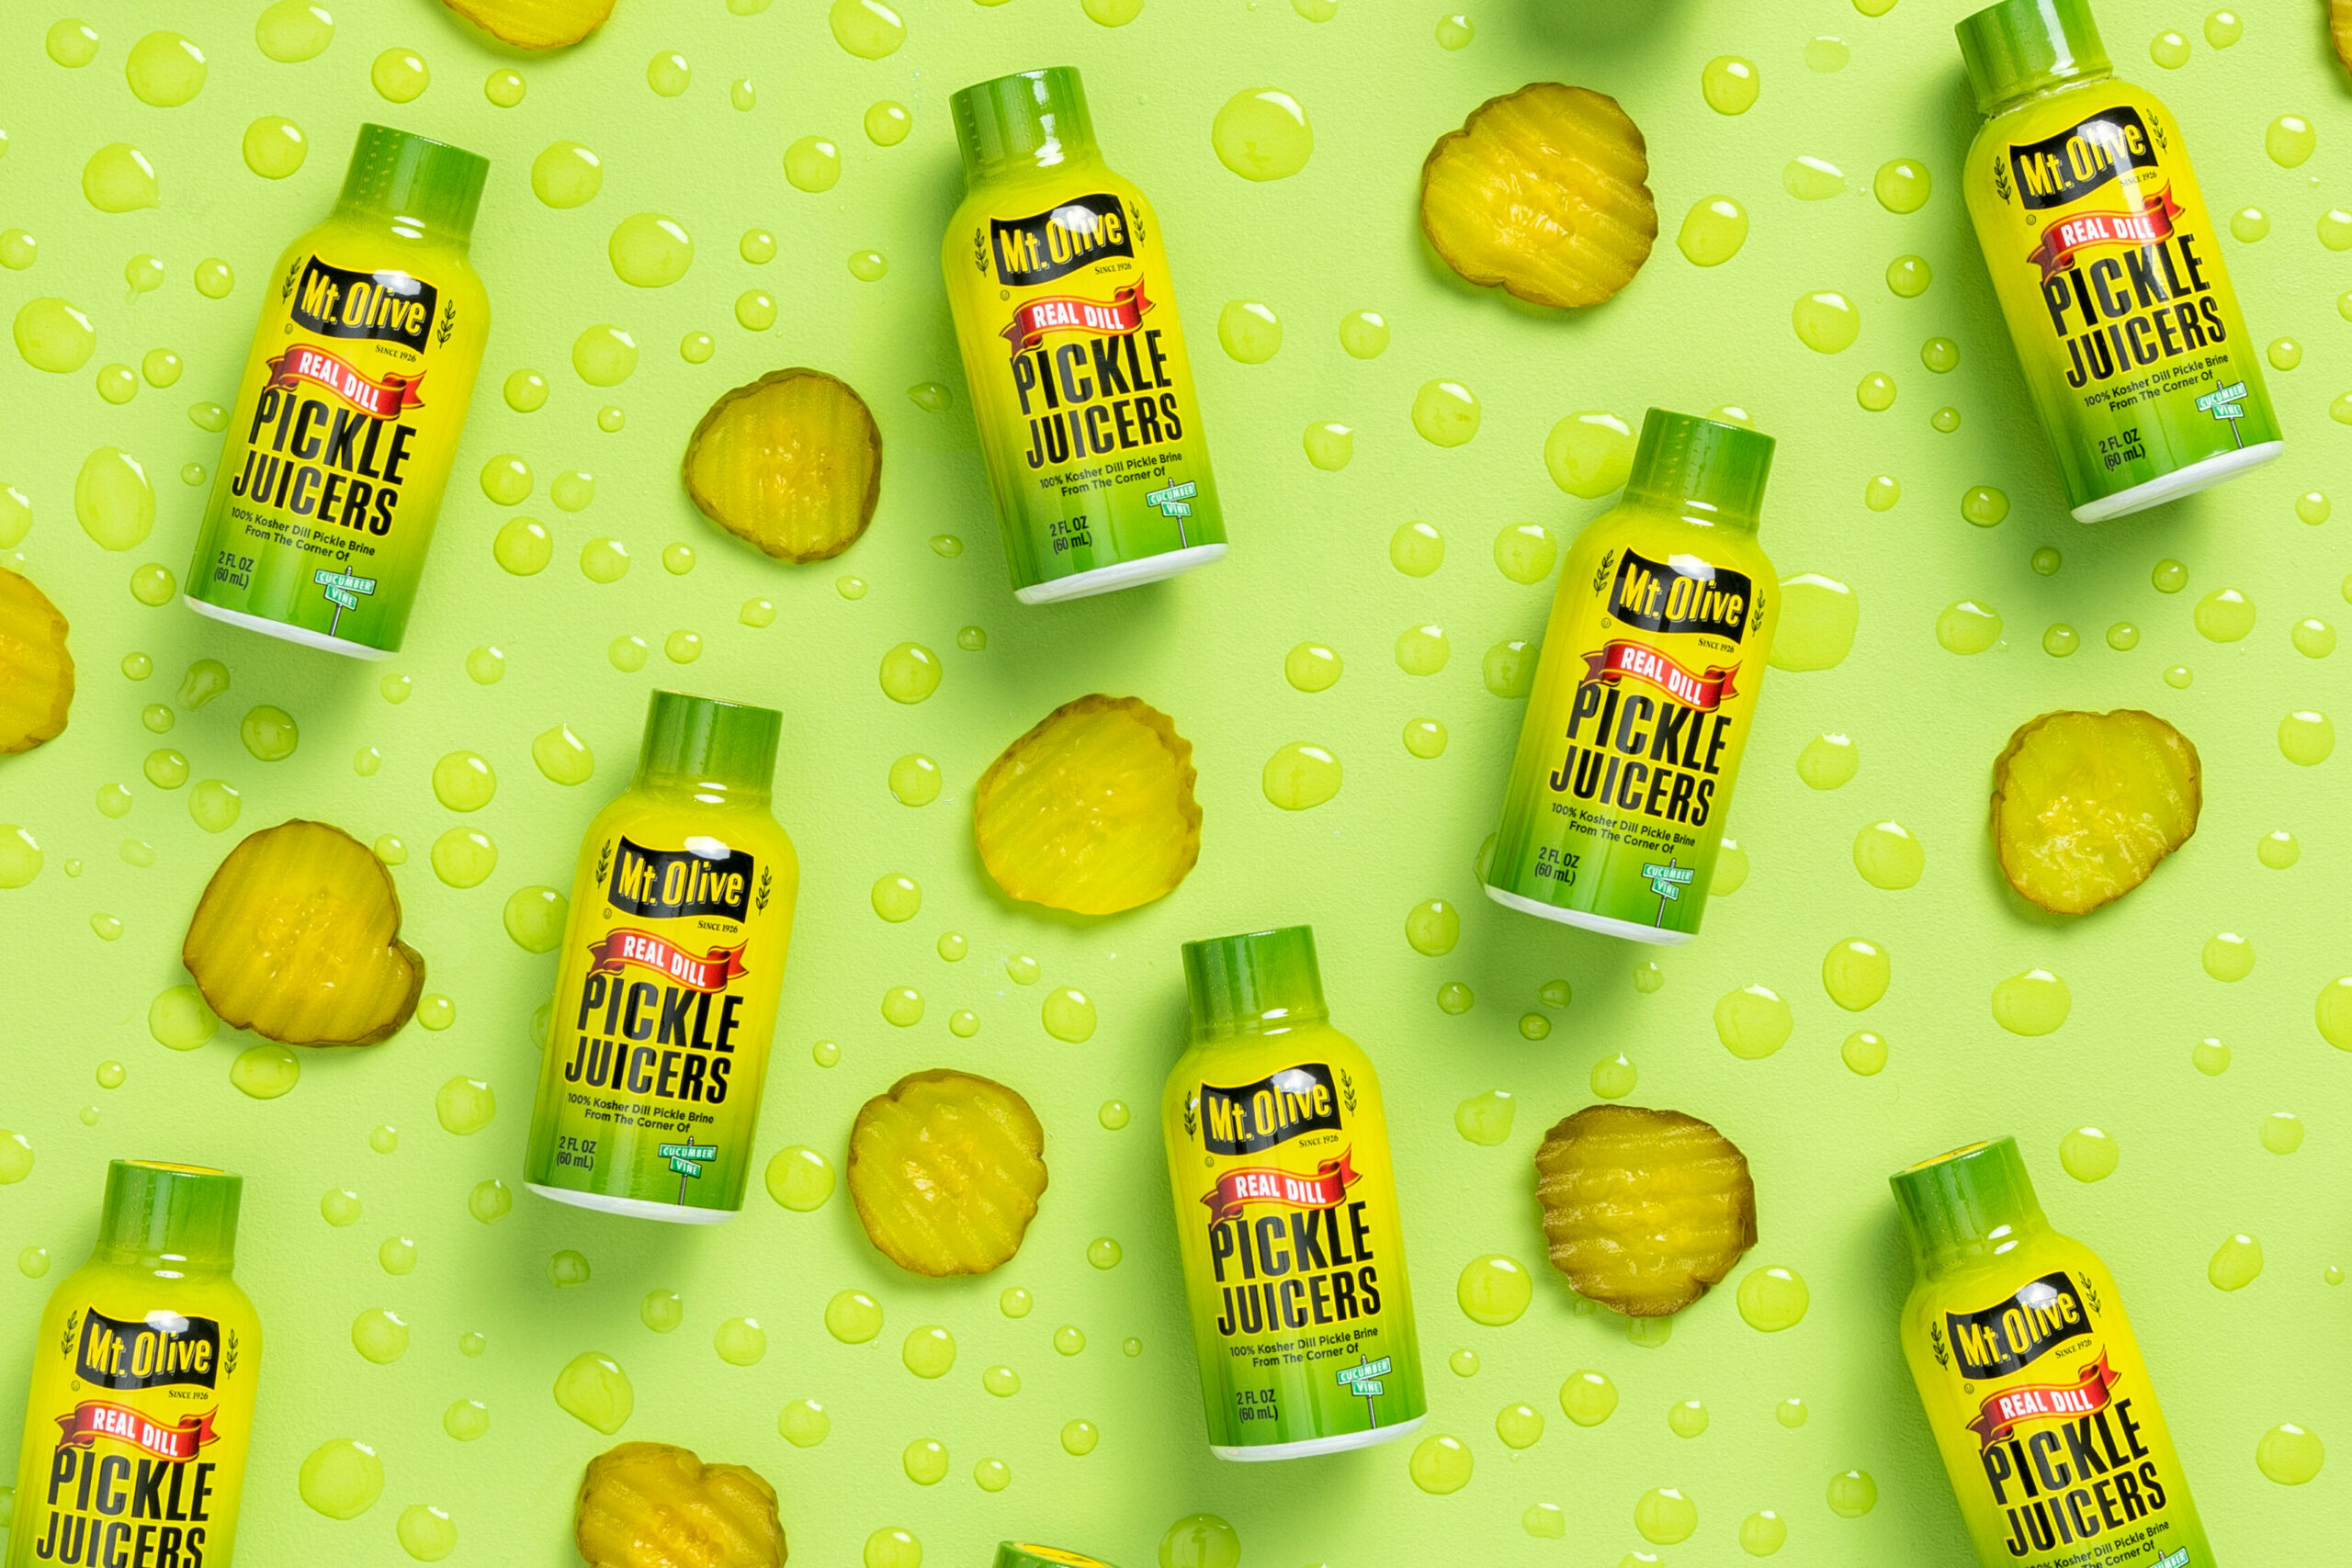 pickle juicers 2 oz bottles with pickle chips and droplets of pickle juice